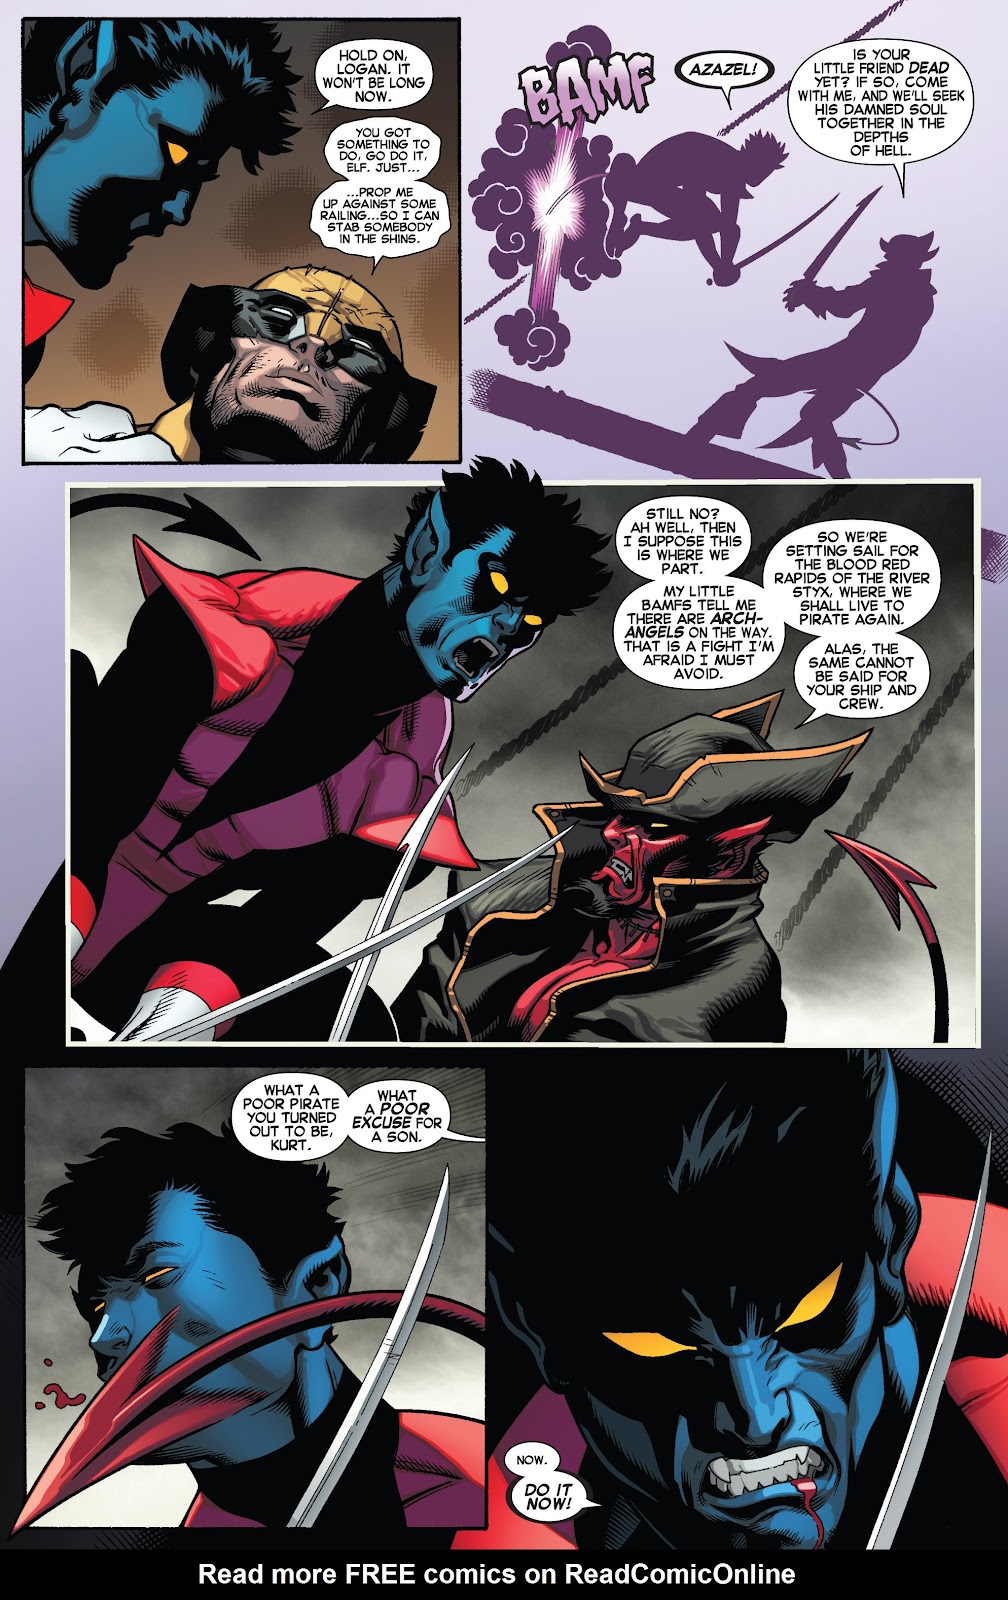 Amazing X Men 2014 Issue 5 | Read Amazing X Men 2014 Issue 5 comic online  in high quality. Read Full Comic online for free - Read comics online in  high quality .